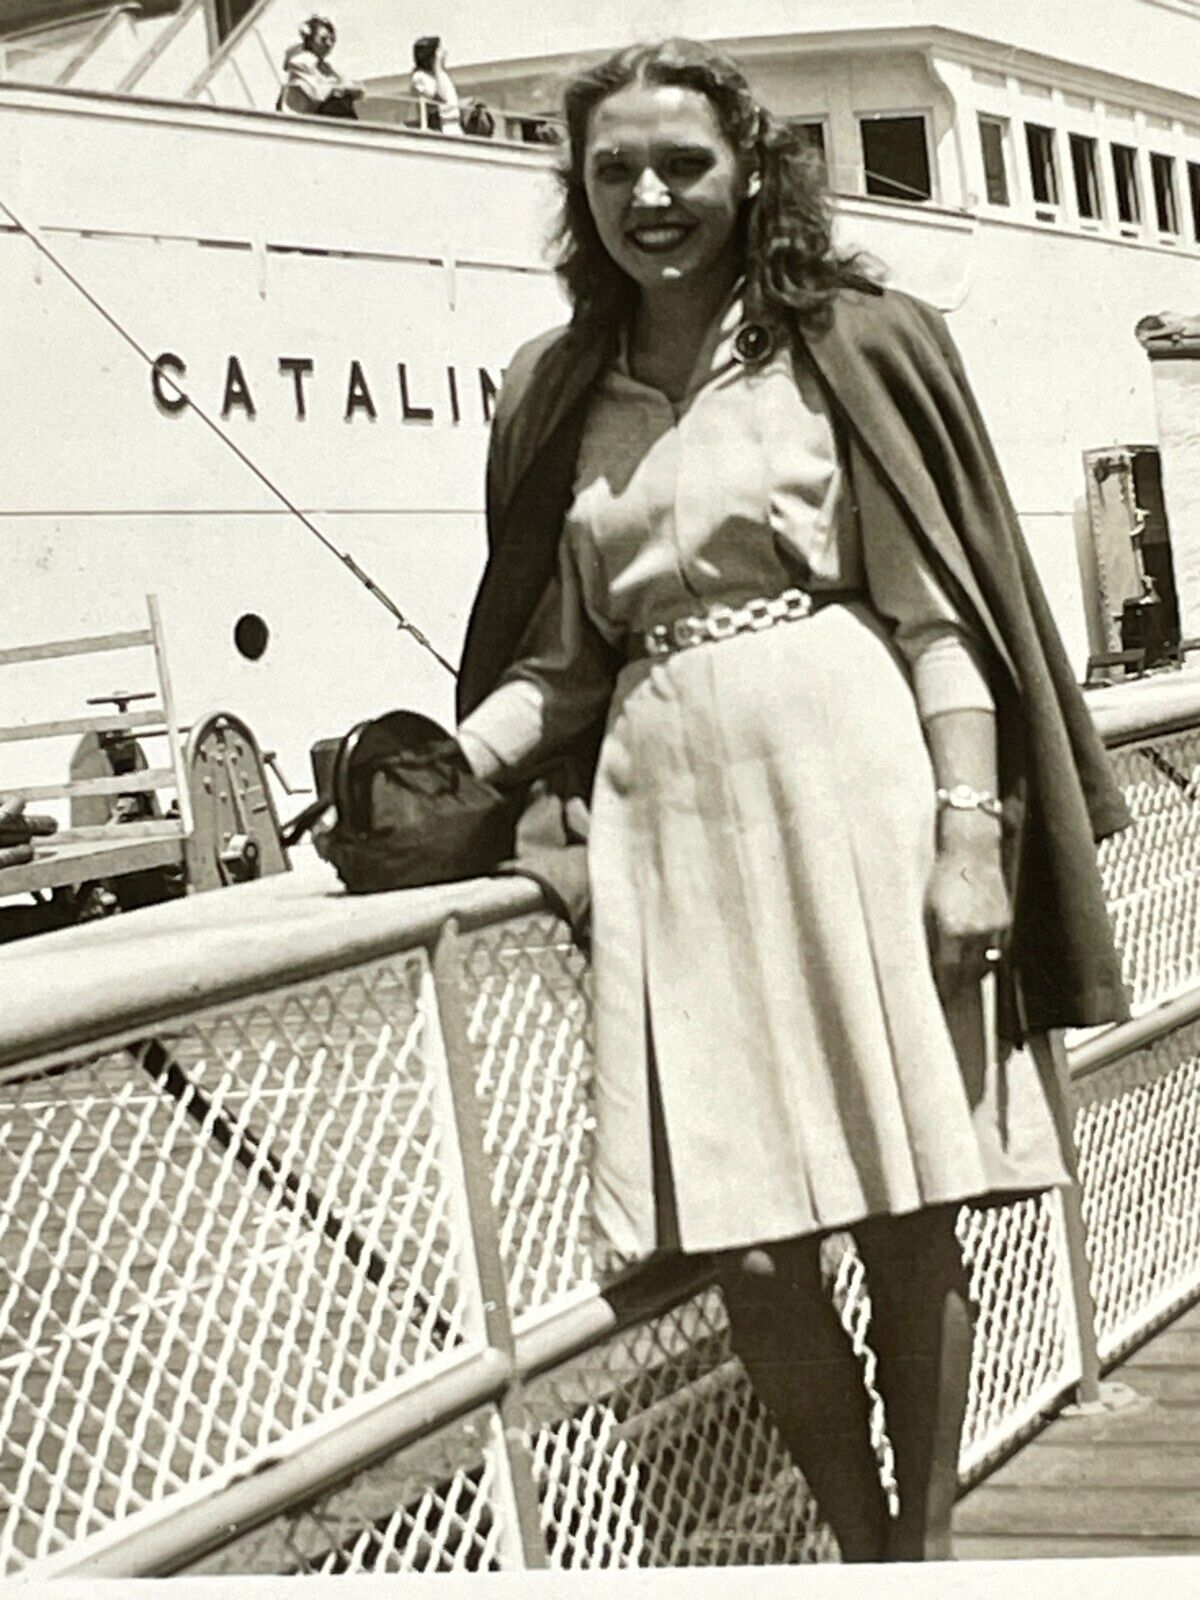 Ui Photograph Pretty Woman Smiling On Dock Boat To Catalina 1940-50's